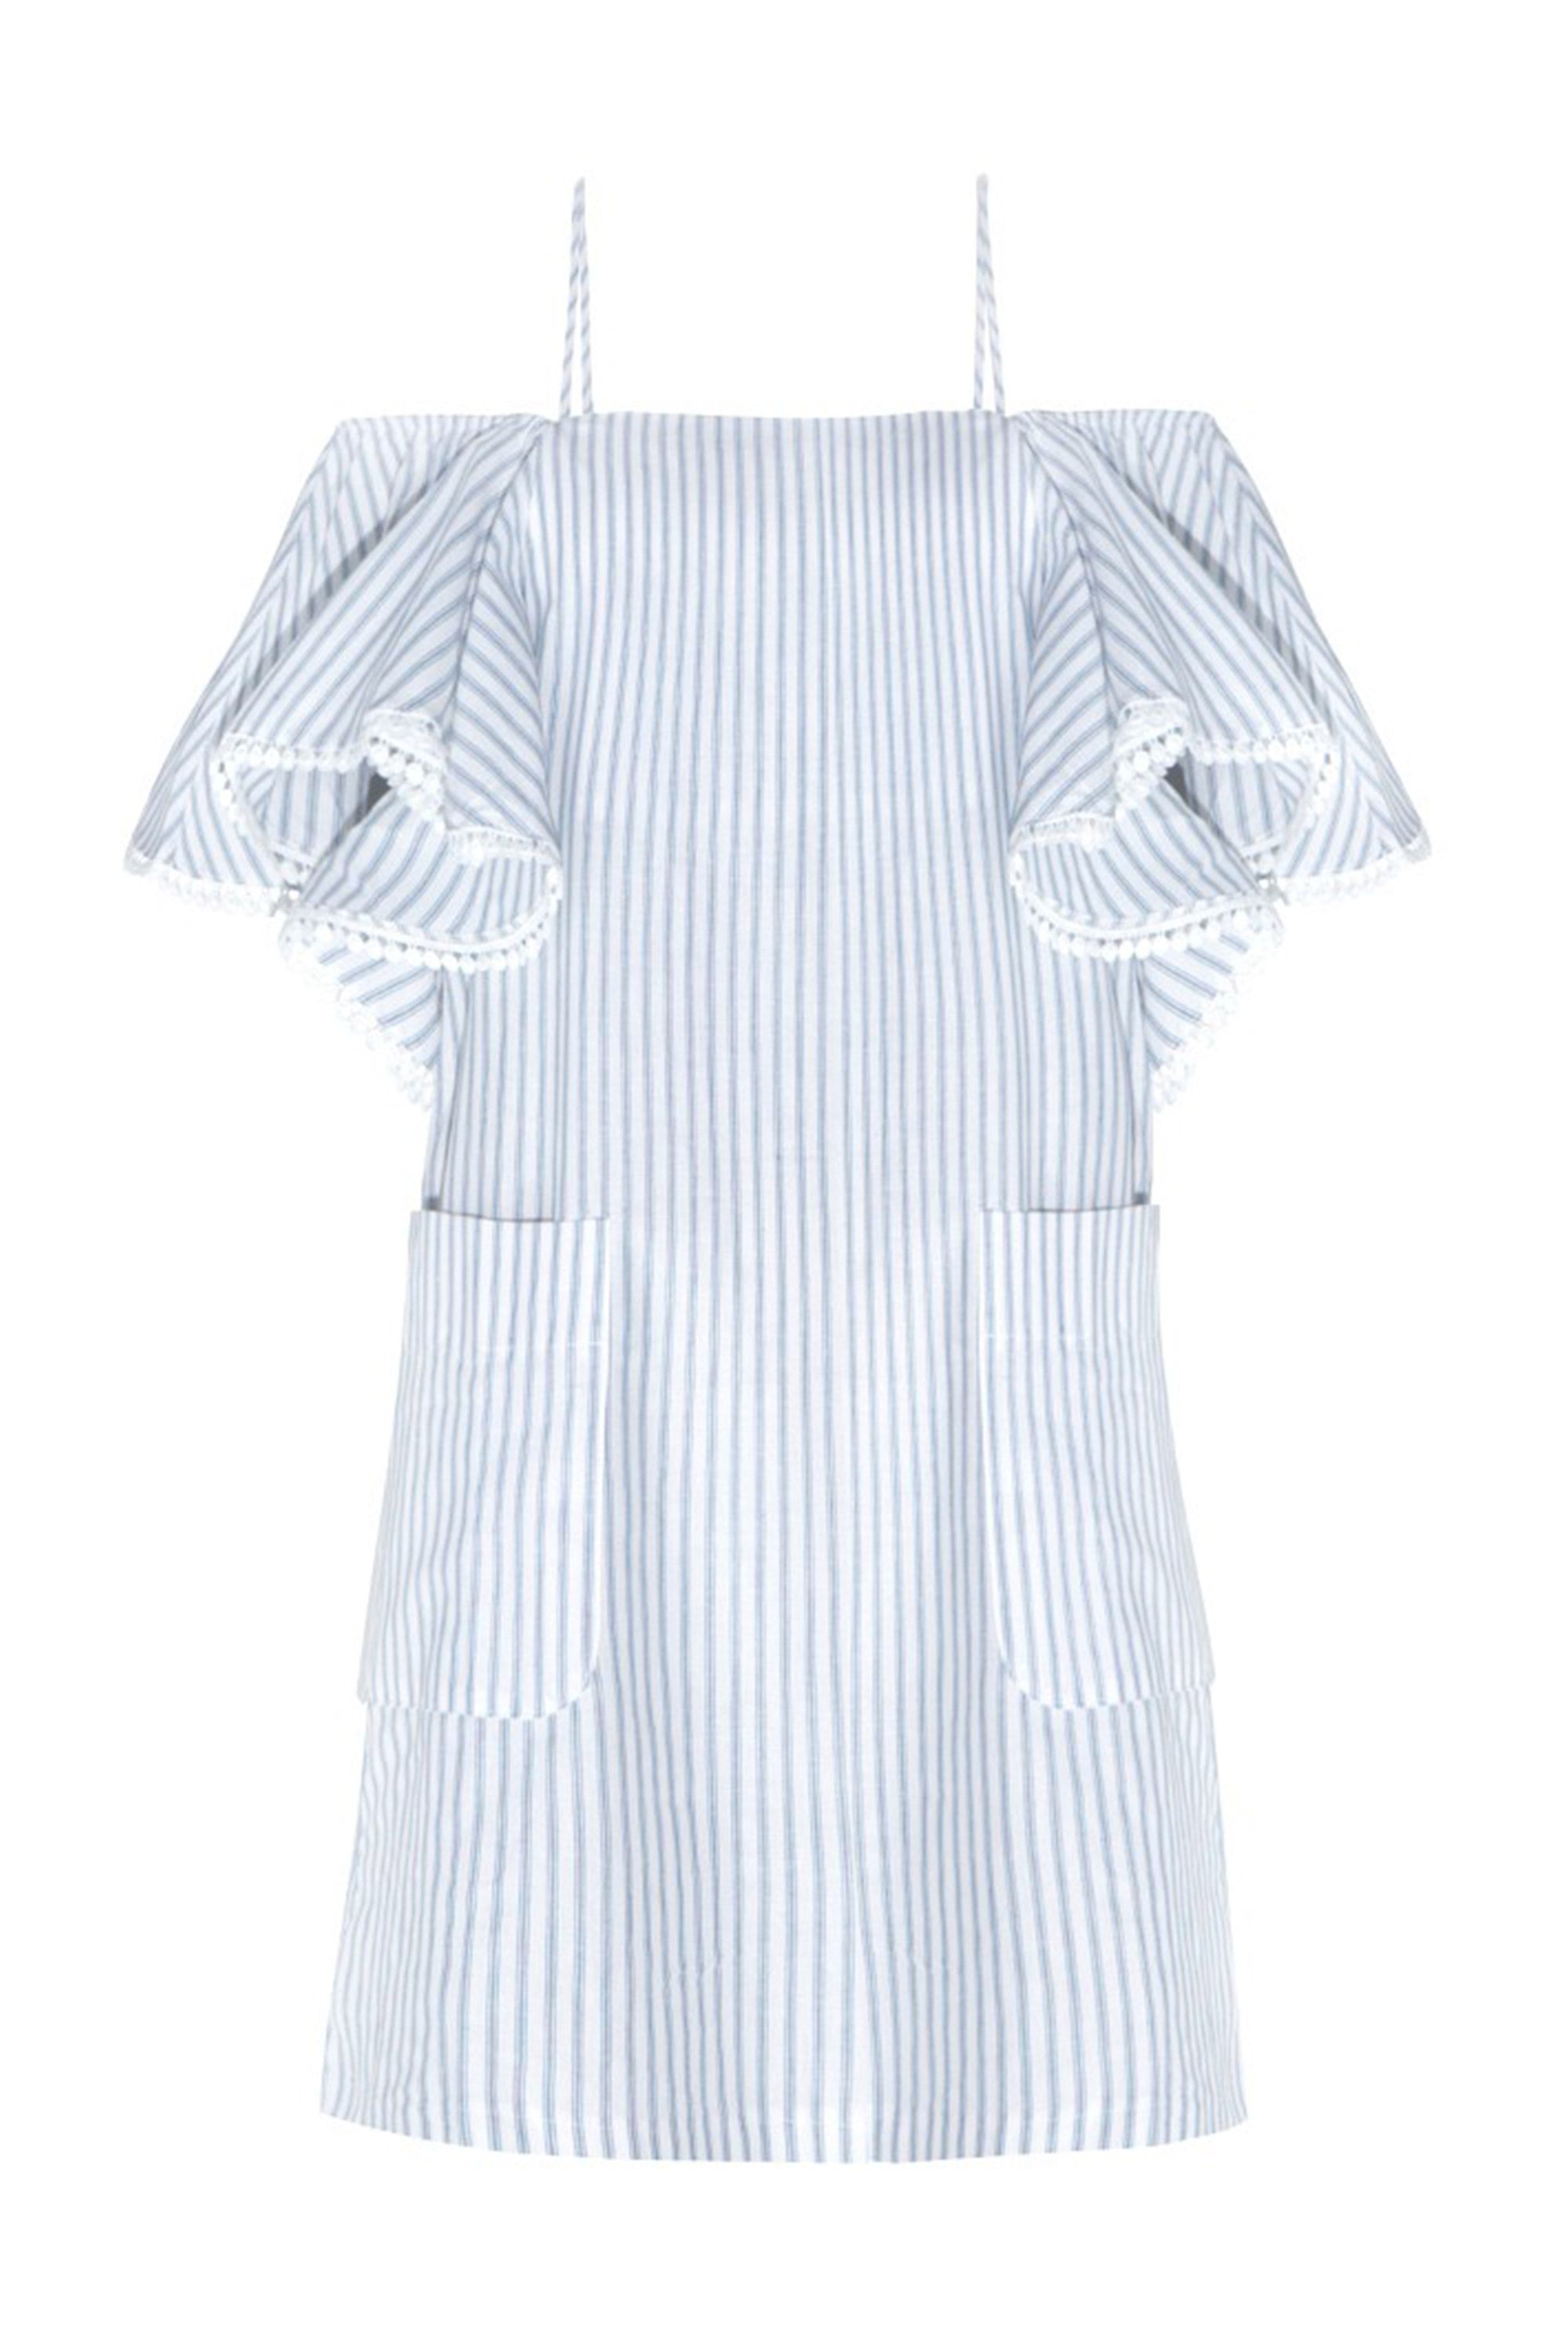 Winterizing Your Summer Dresses — Lucy's whims